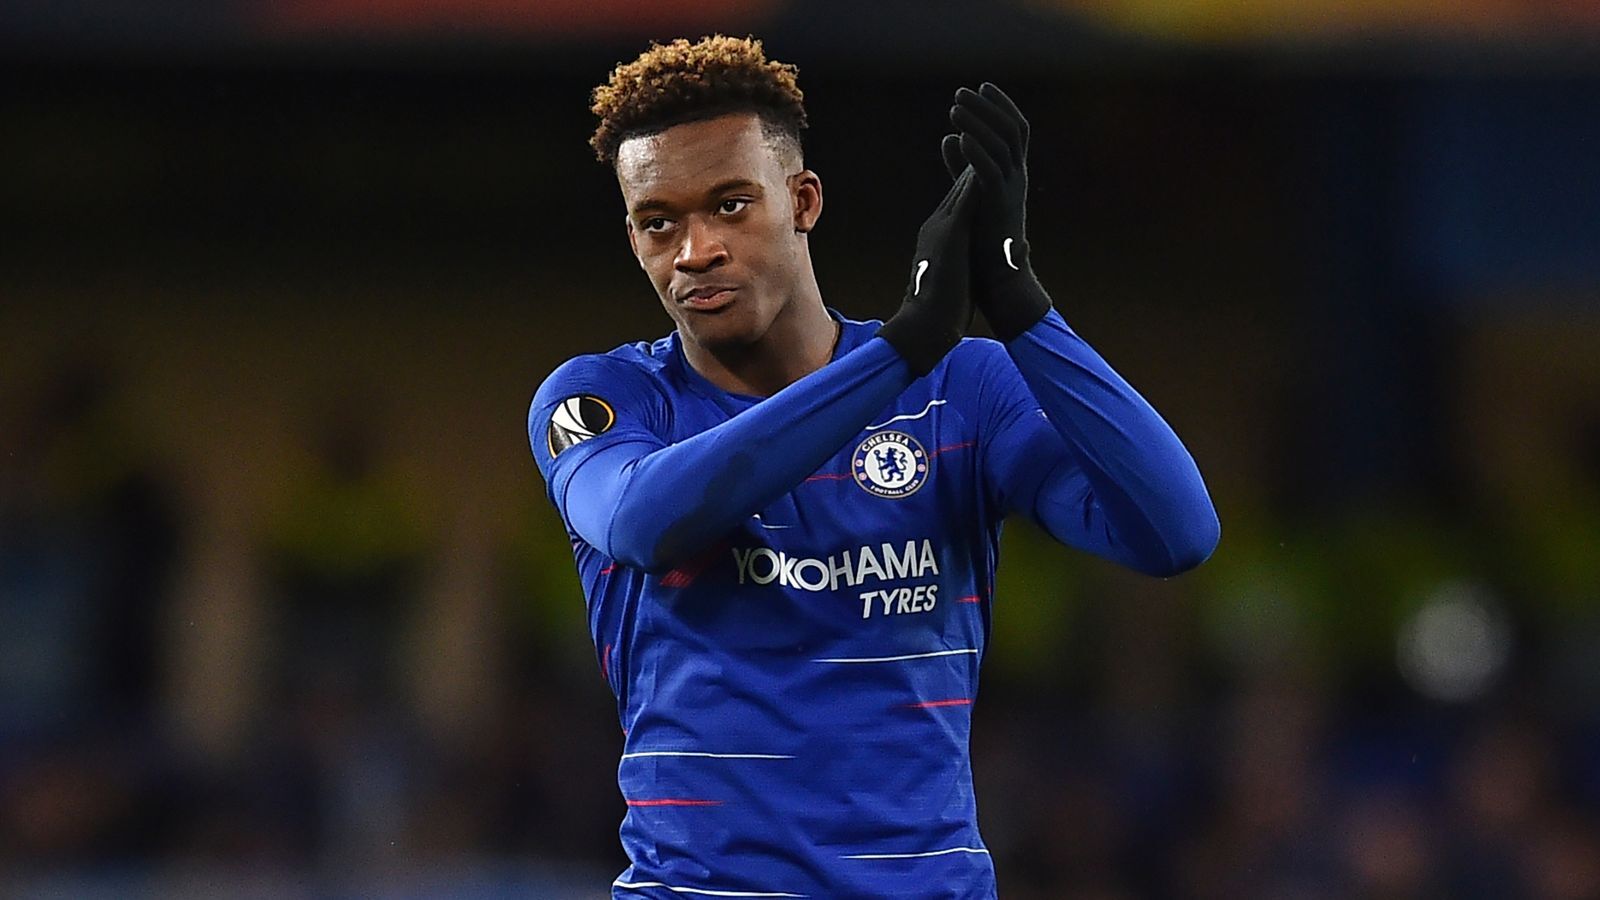 Callum Hudson-Odoi will not face any further action from police after rape allegation